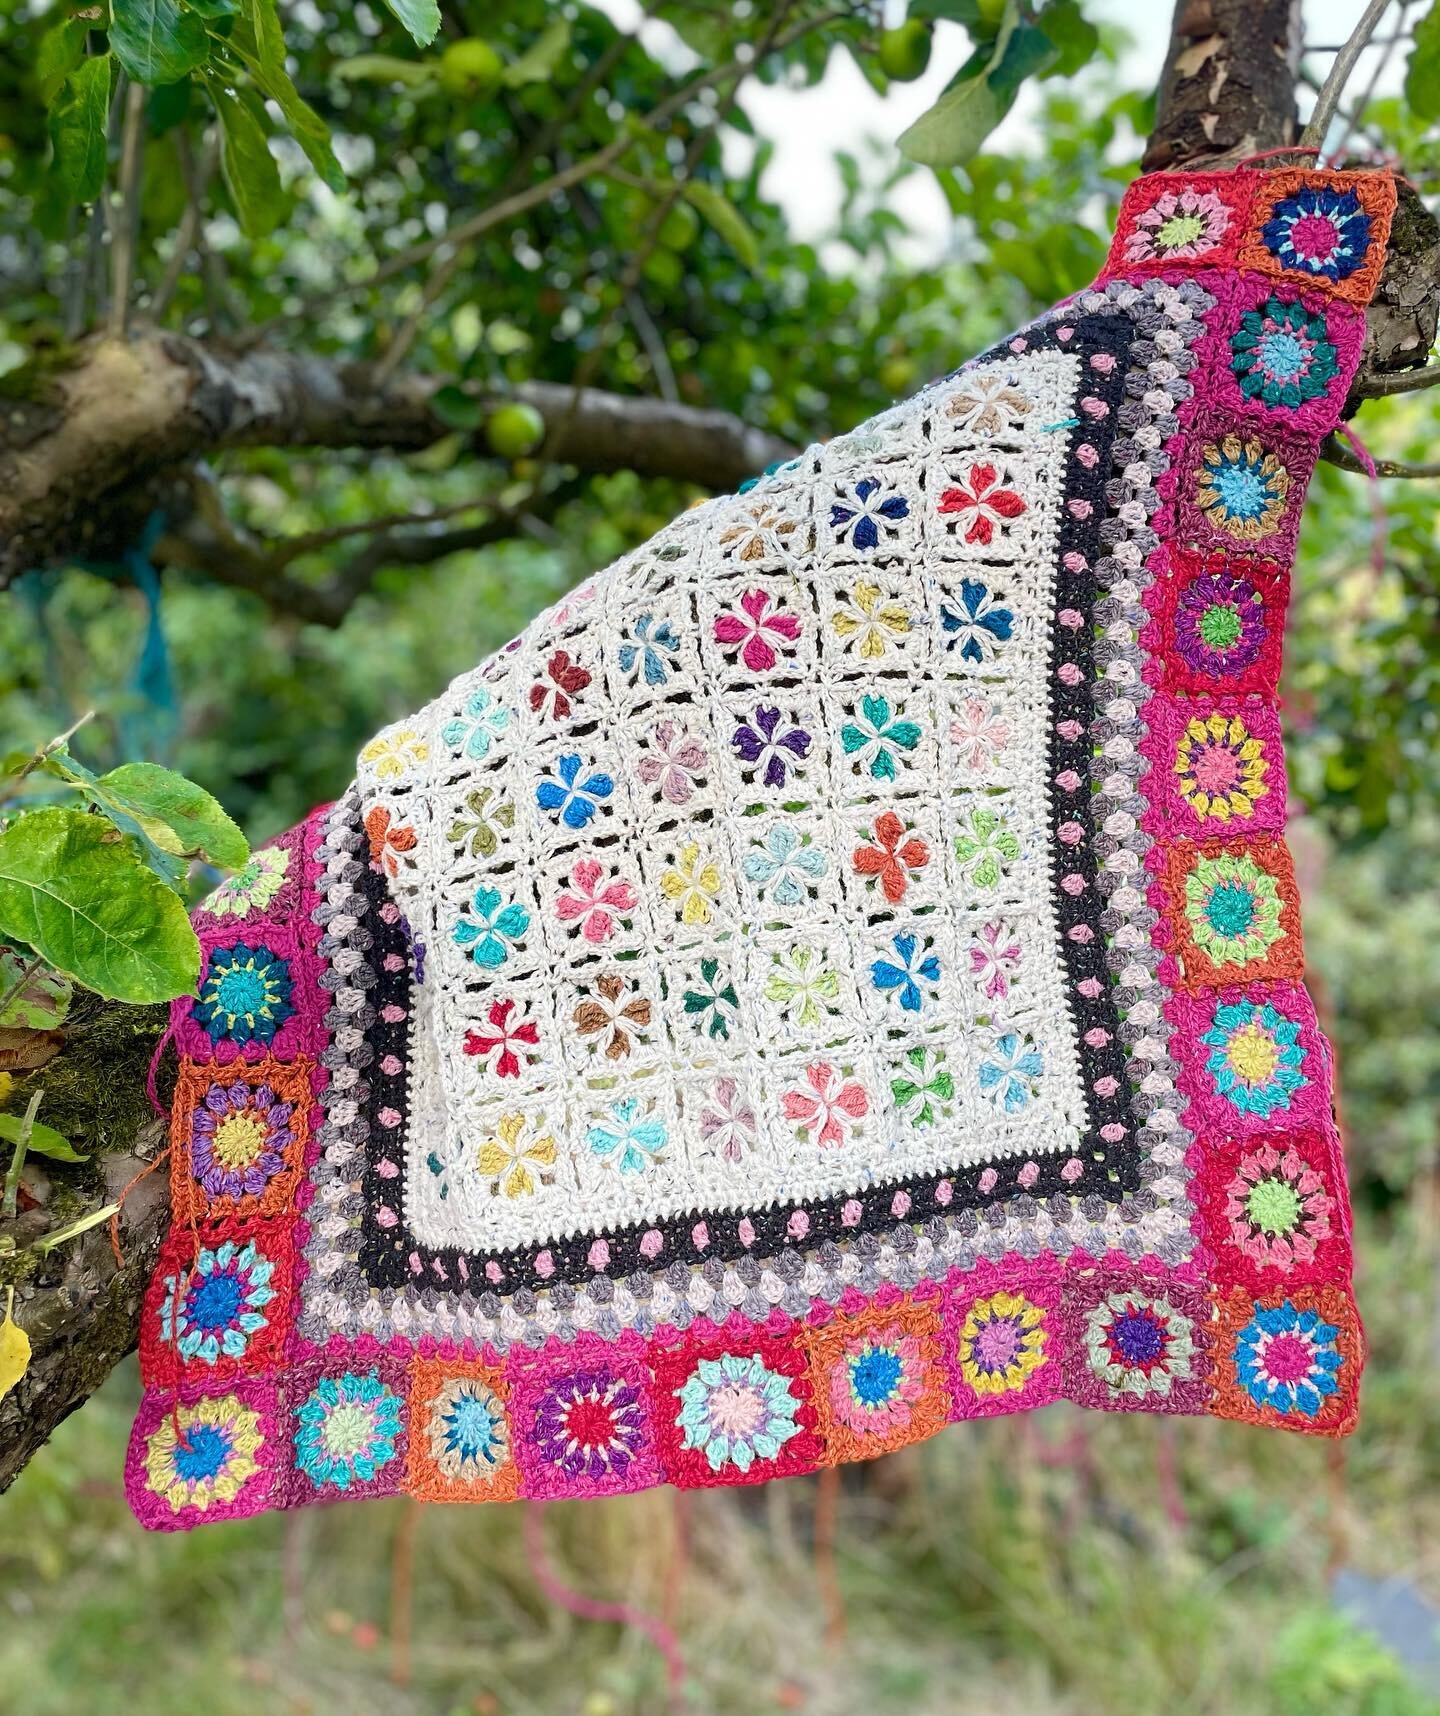 Of course you can crochet the border of a blanket on the hottest day ever!!!
☀️
☀️
☀️
#crochetblanket #crochet #crochetersofinstagram #crochetlove #crochetaddict #ganchillo #ganchillocreativo #colourfulcrochet #colorfulcrochet #terrazzocolourpack 
ya